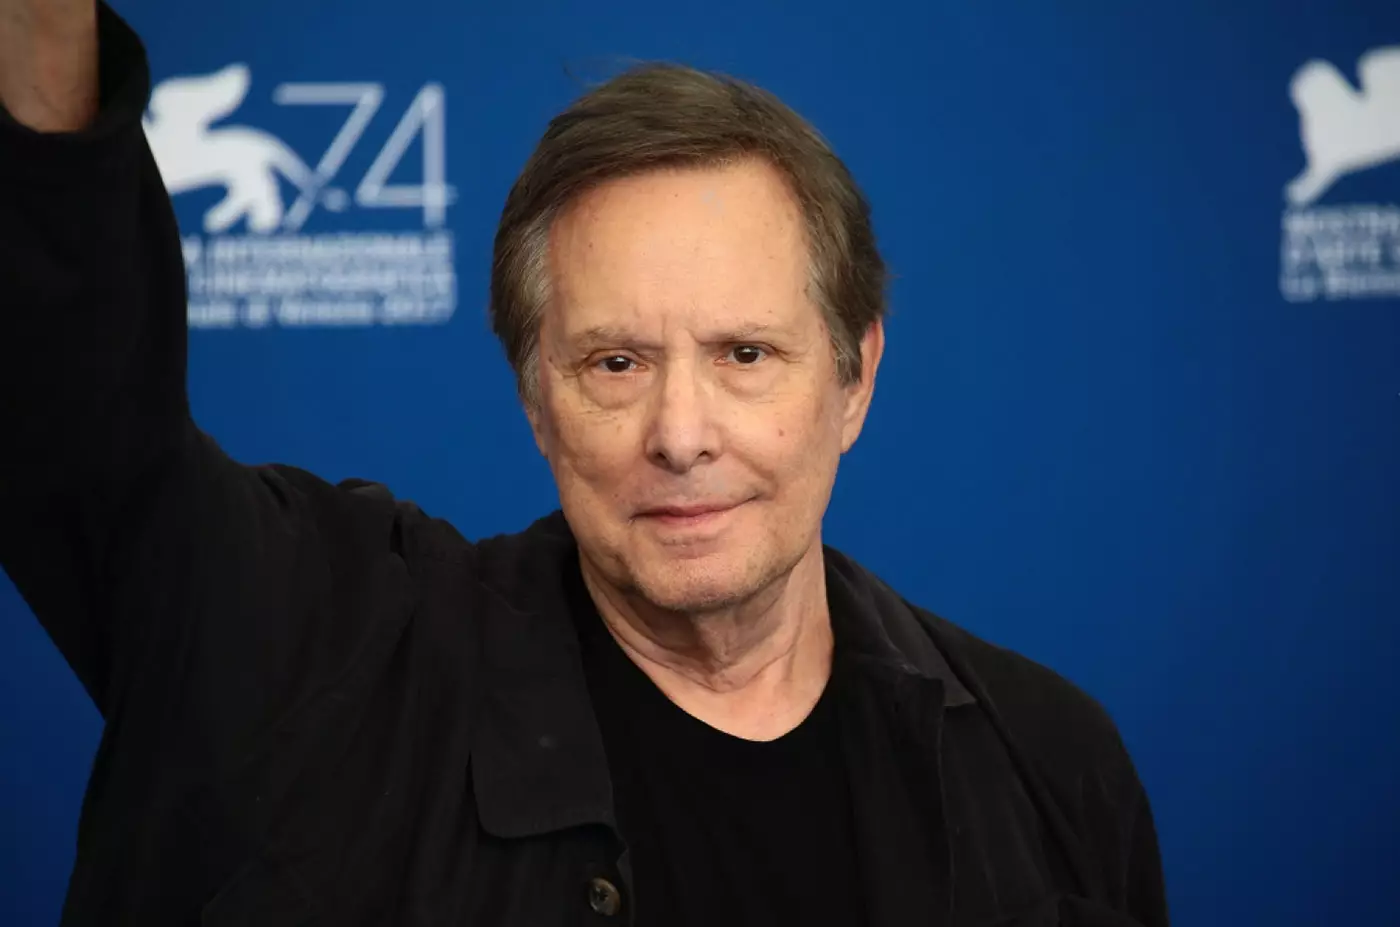 World Cinema Giant William Friedkin, Director of "The Exorcist", Dies Aged 87